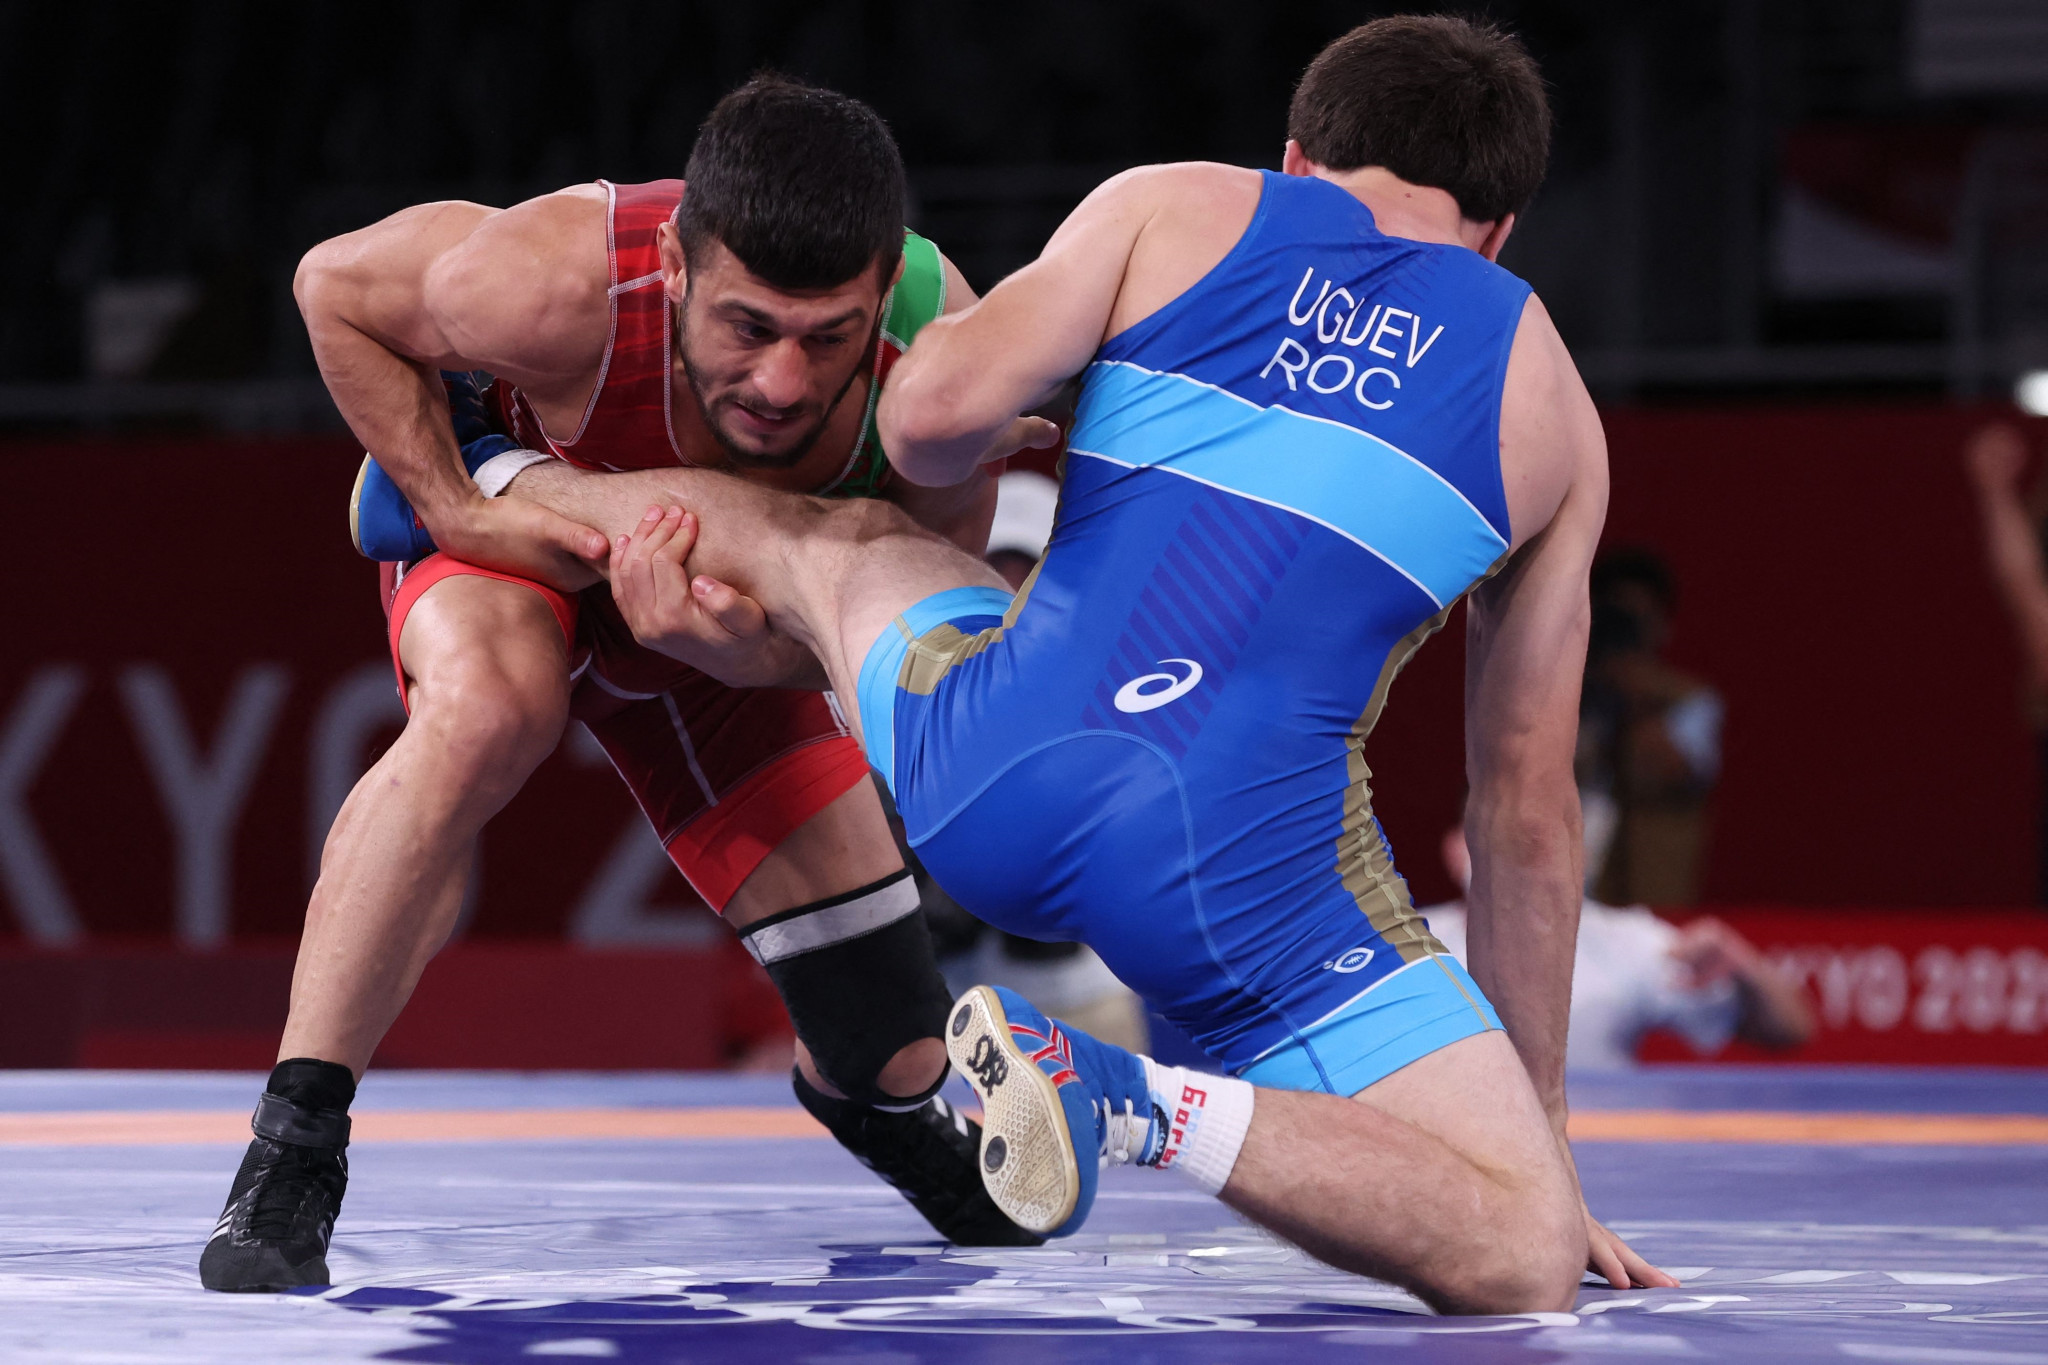 United World Wrestling has agreed to readmit Russian wrestlers as neutrals following the IOC's recommendations ©Getty Images